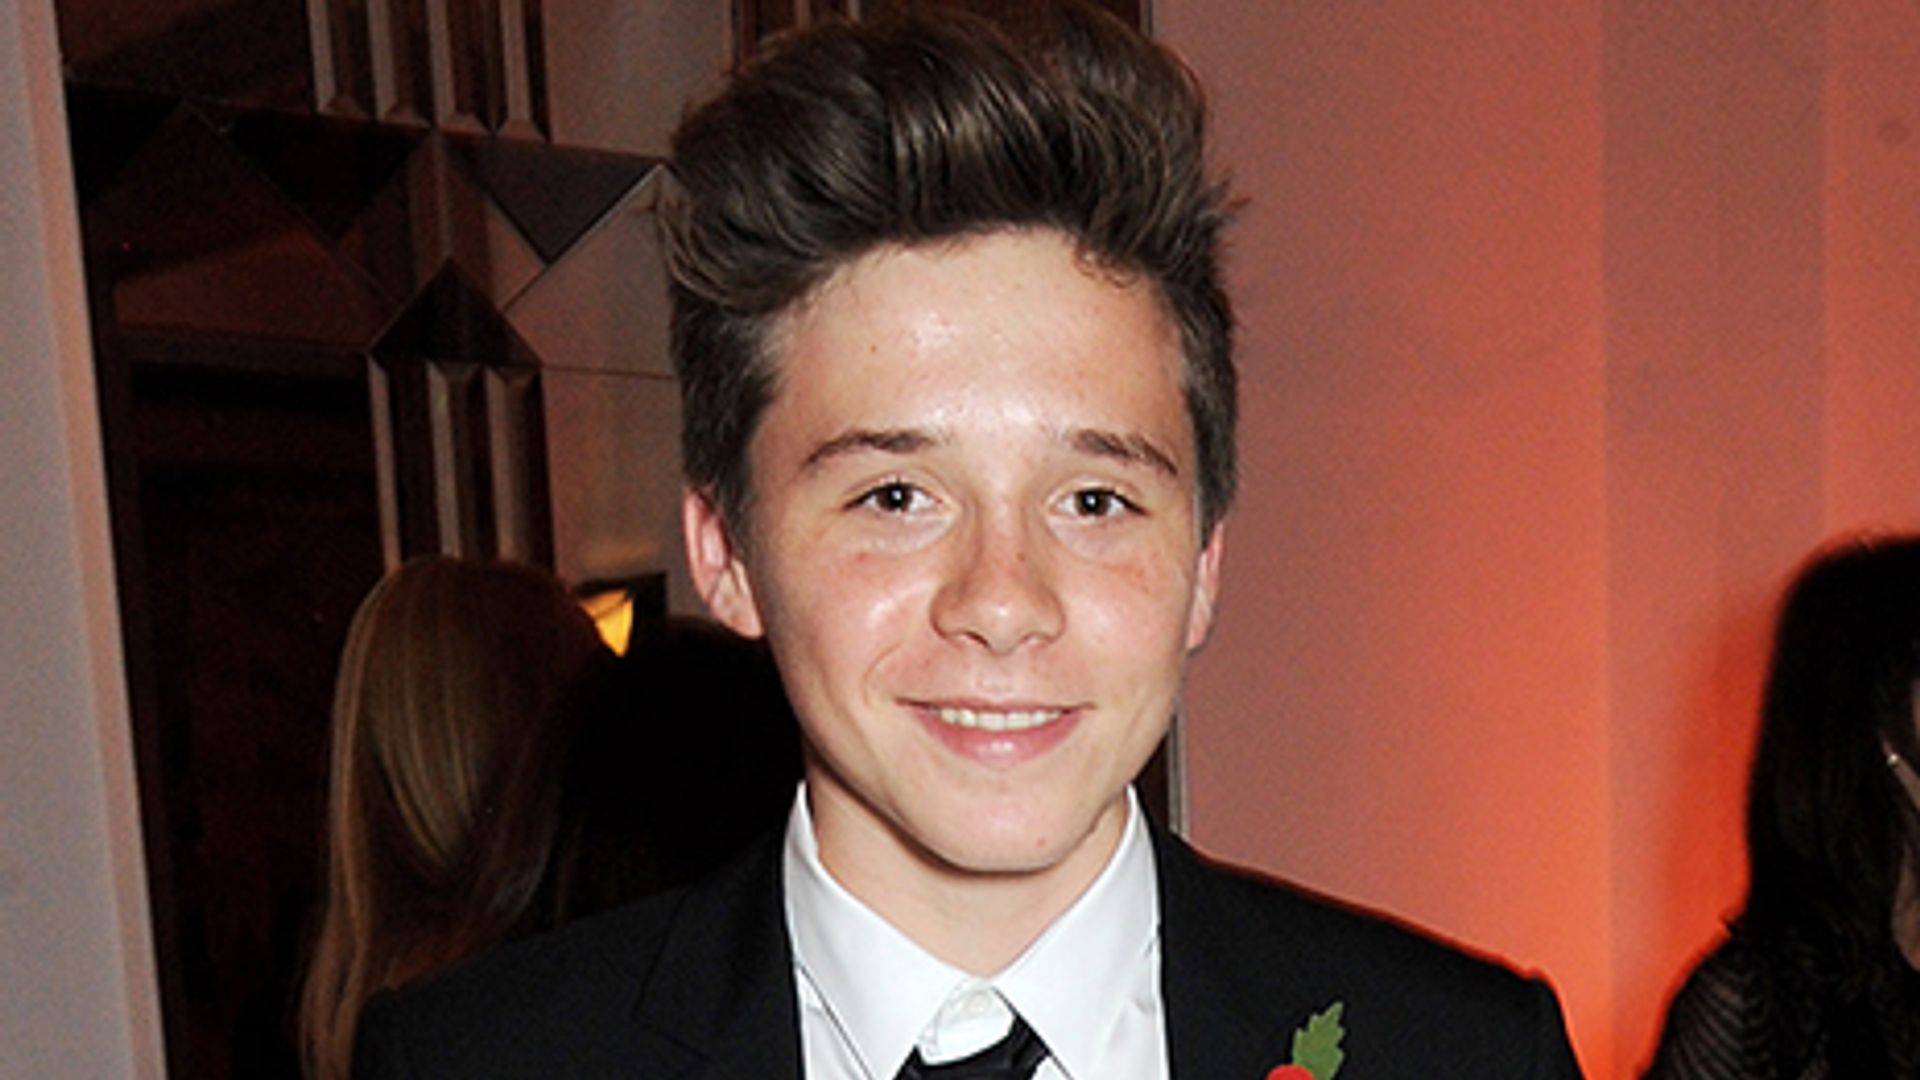 Brooklyn Beckham reportedly takes on work experience with Guy Ritchie